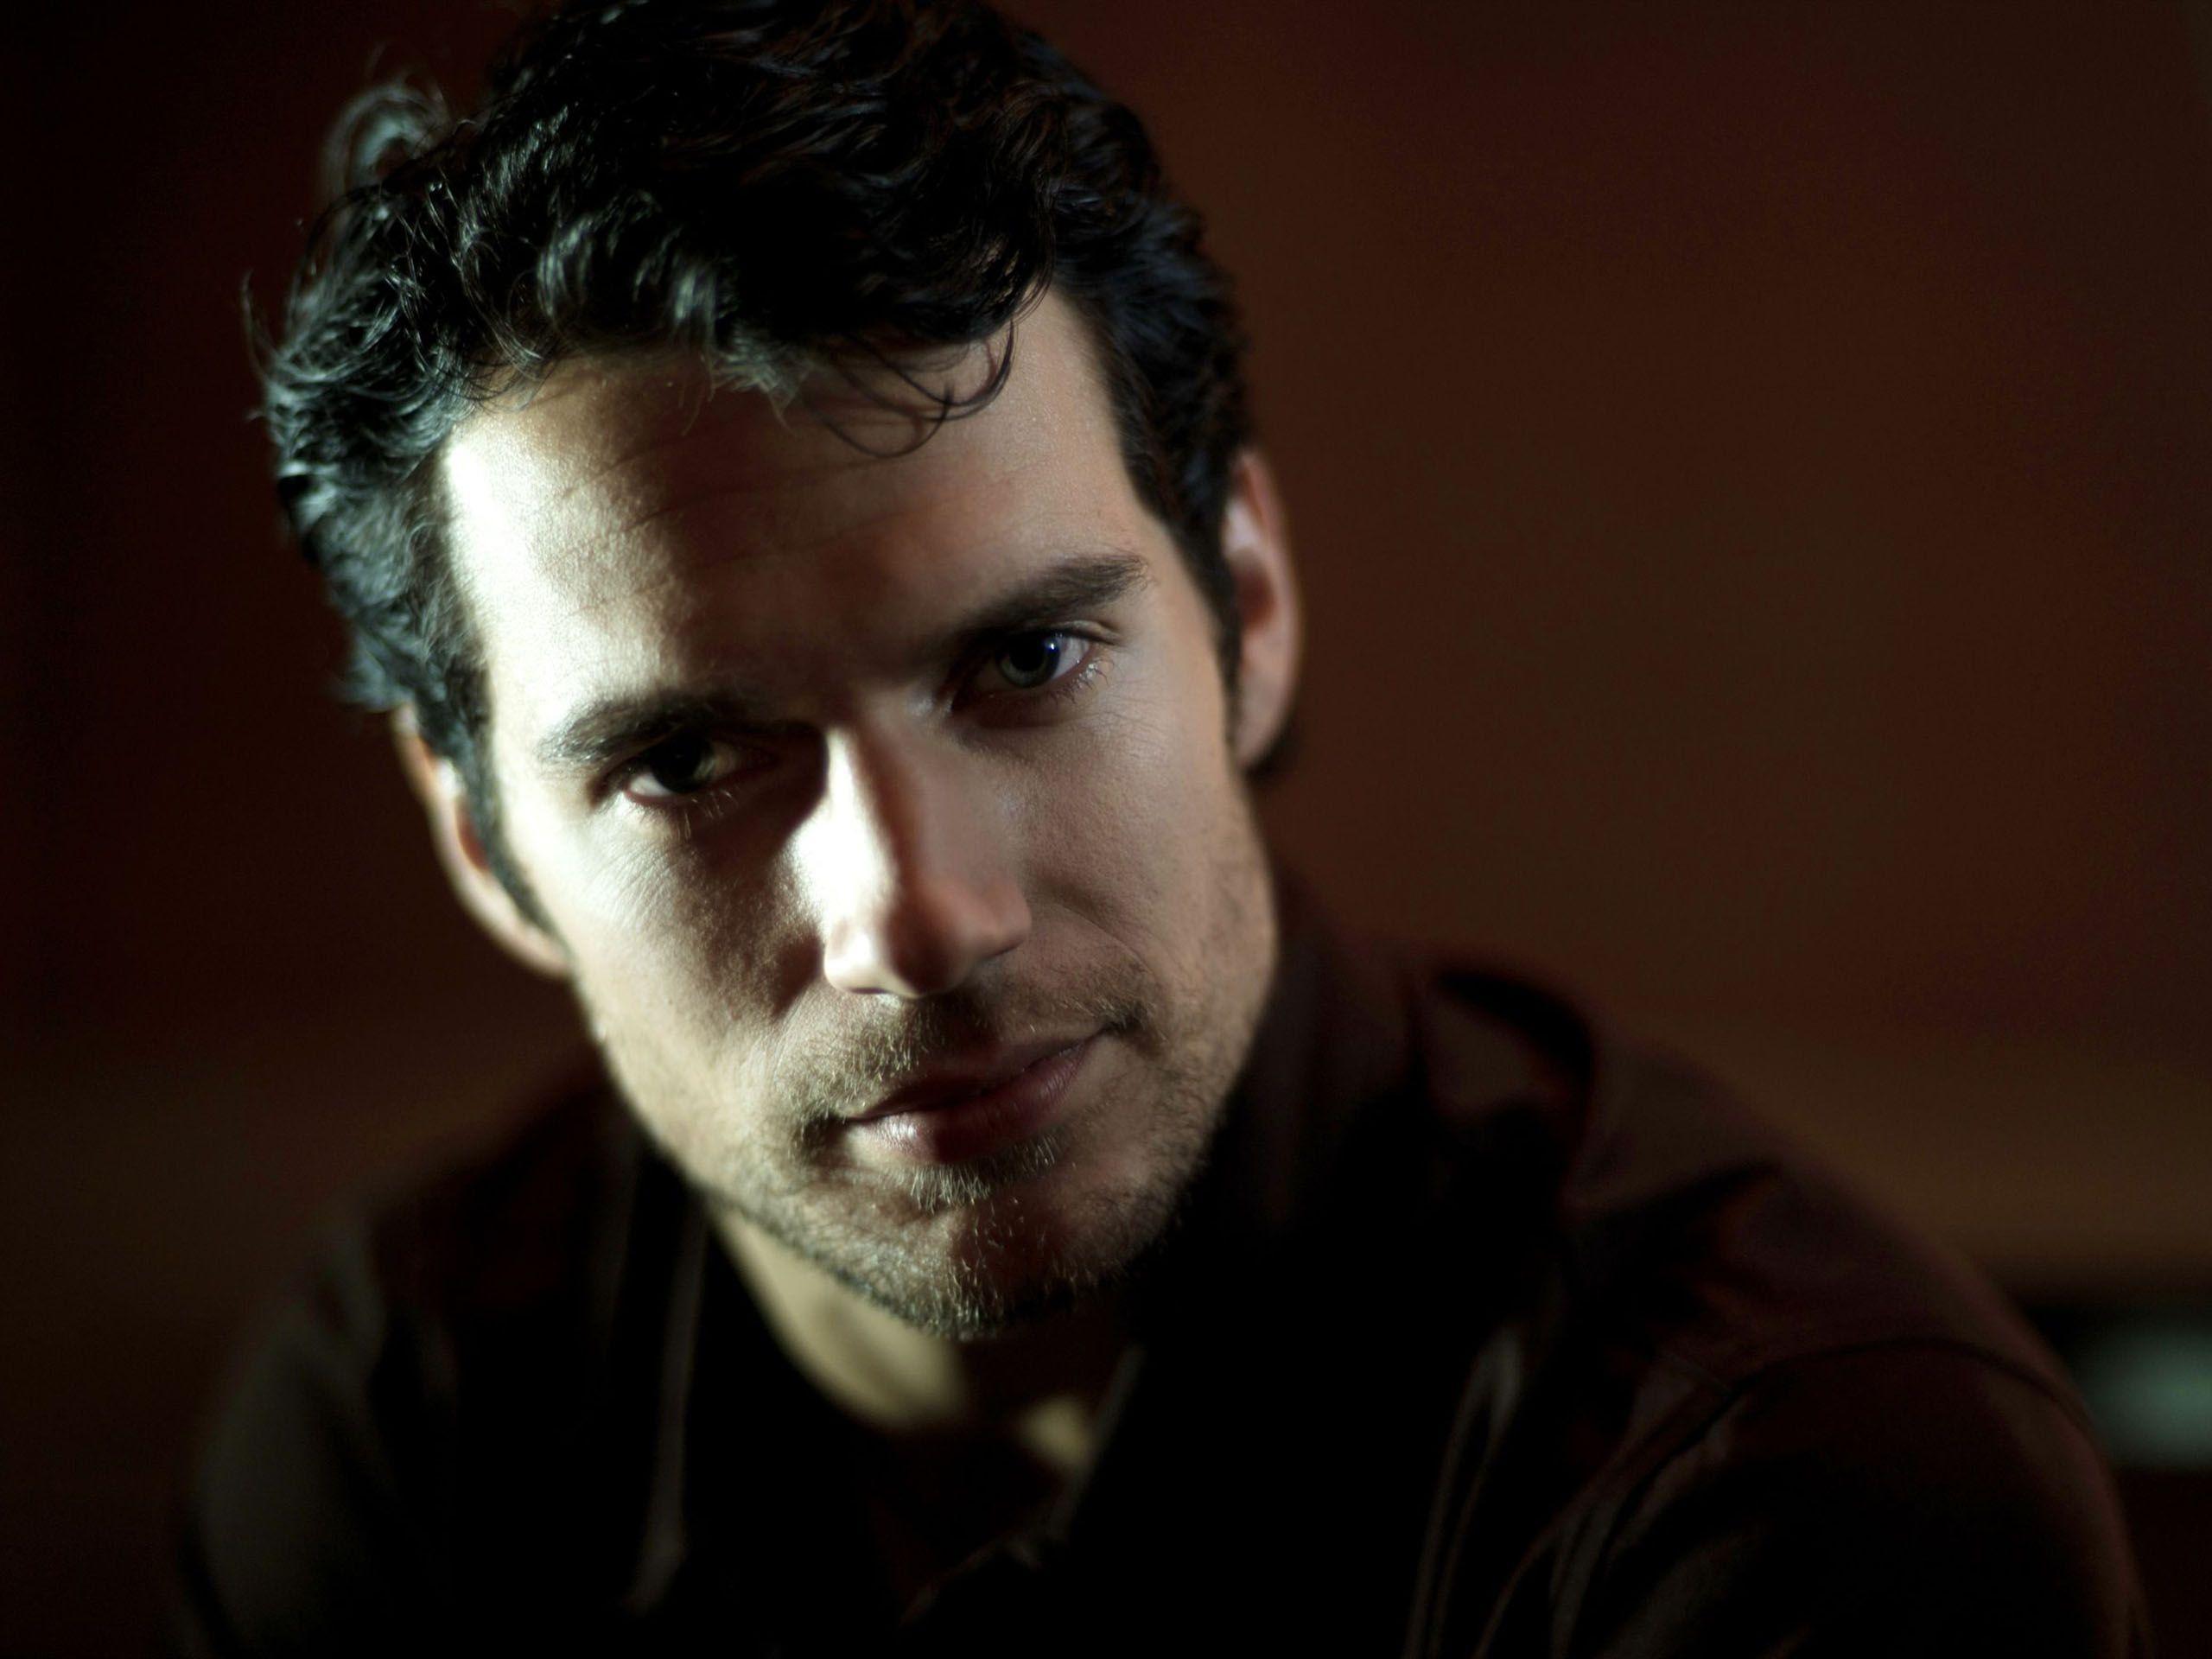 Henry Cavill Wallpaper High Resolution and Quality Download